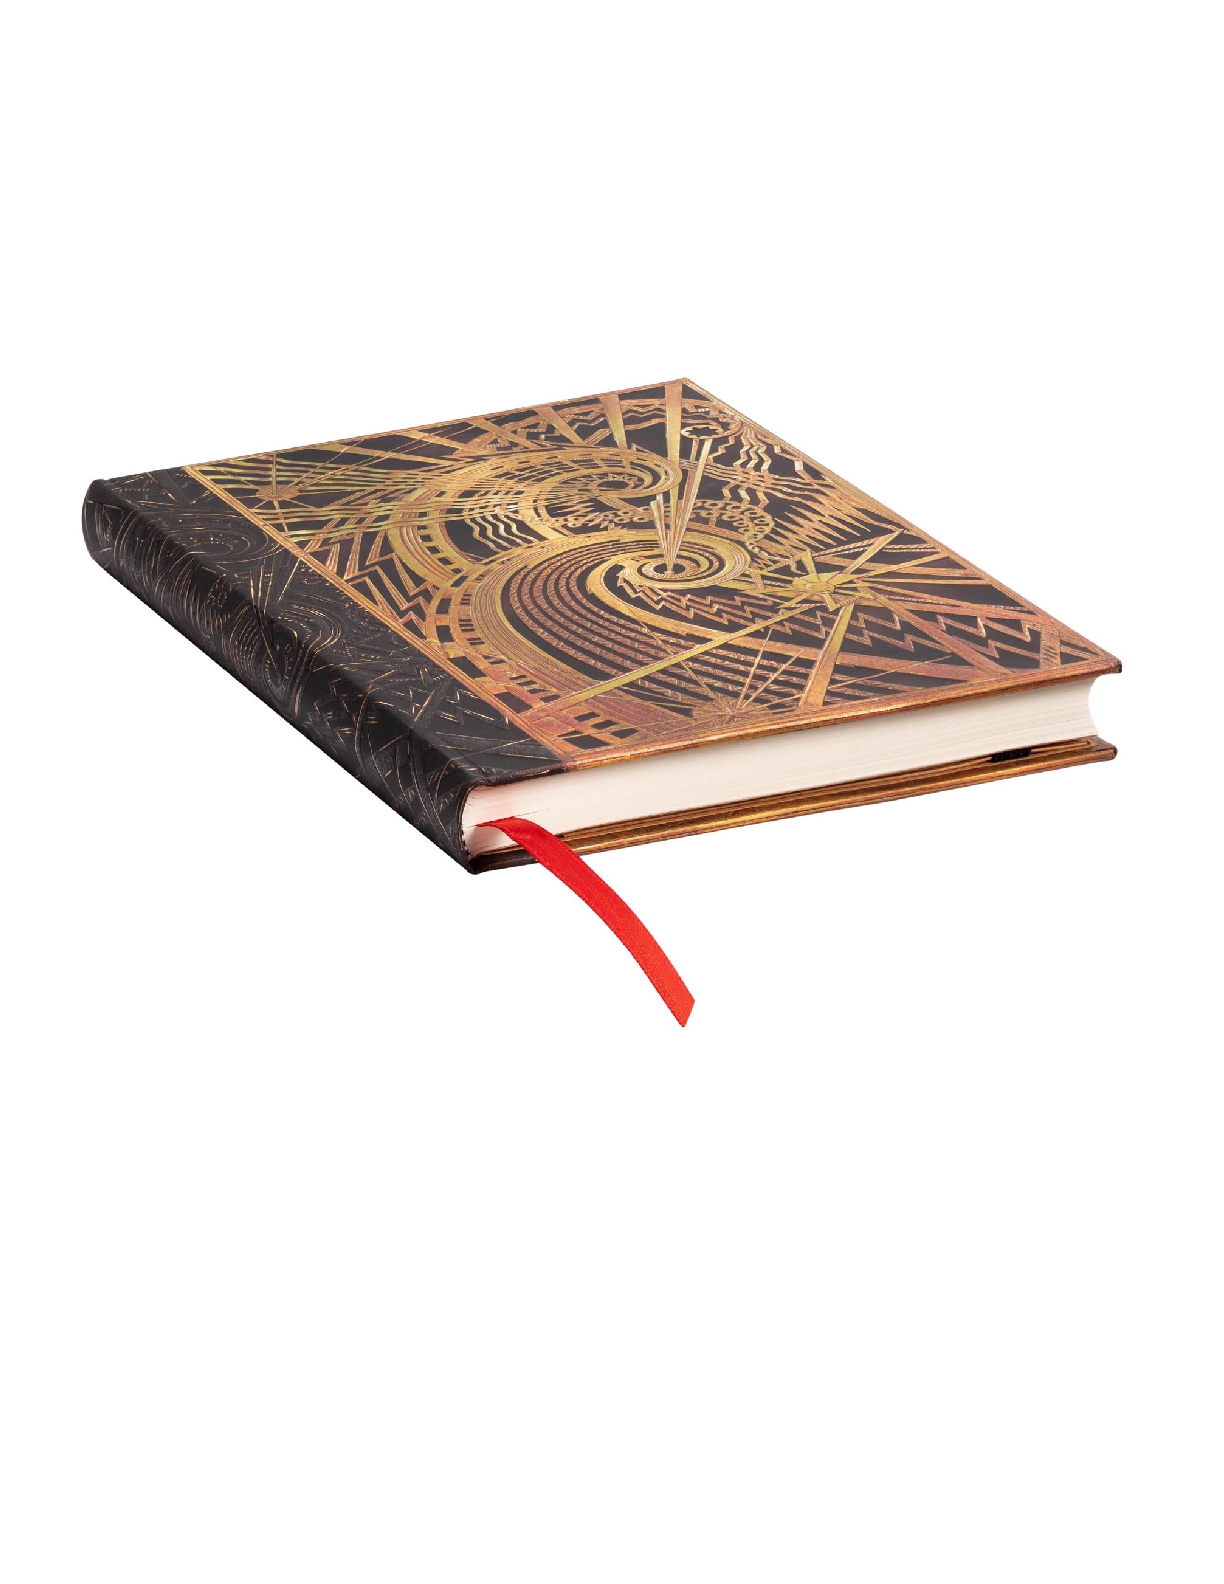 The Chanin Spiral, New York Deco, Hardcover, Midi, Unlined, Elastic Band Closure, 144 Pg, 120 GSM